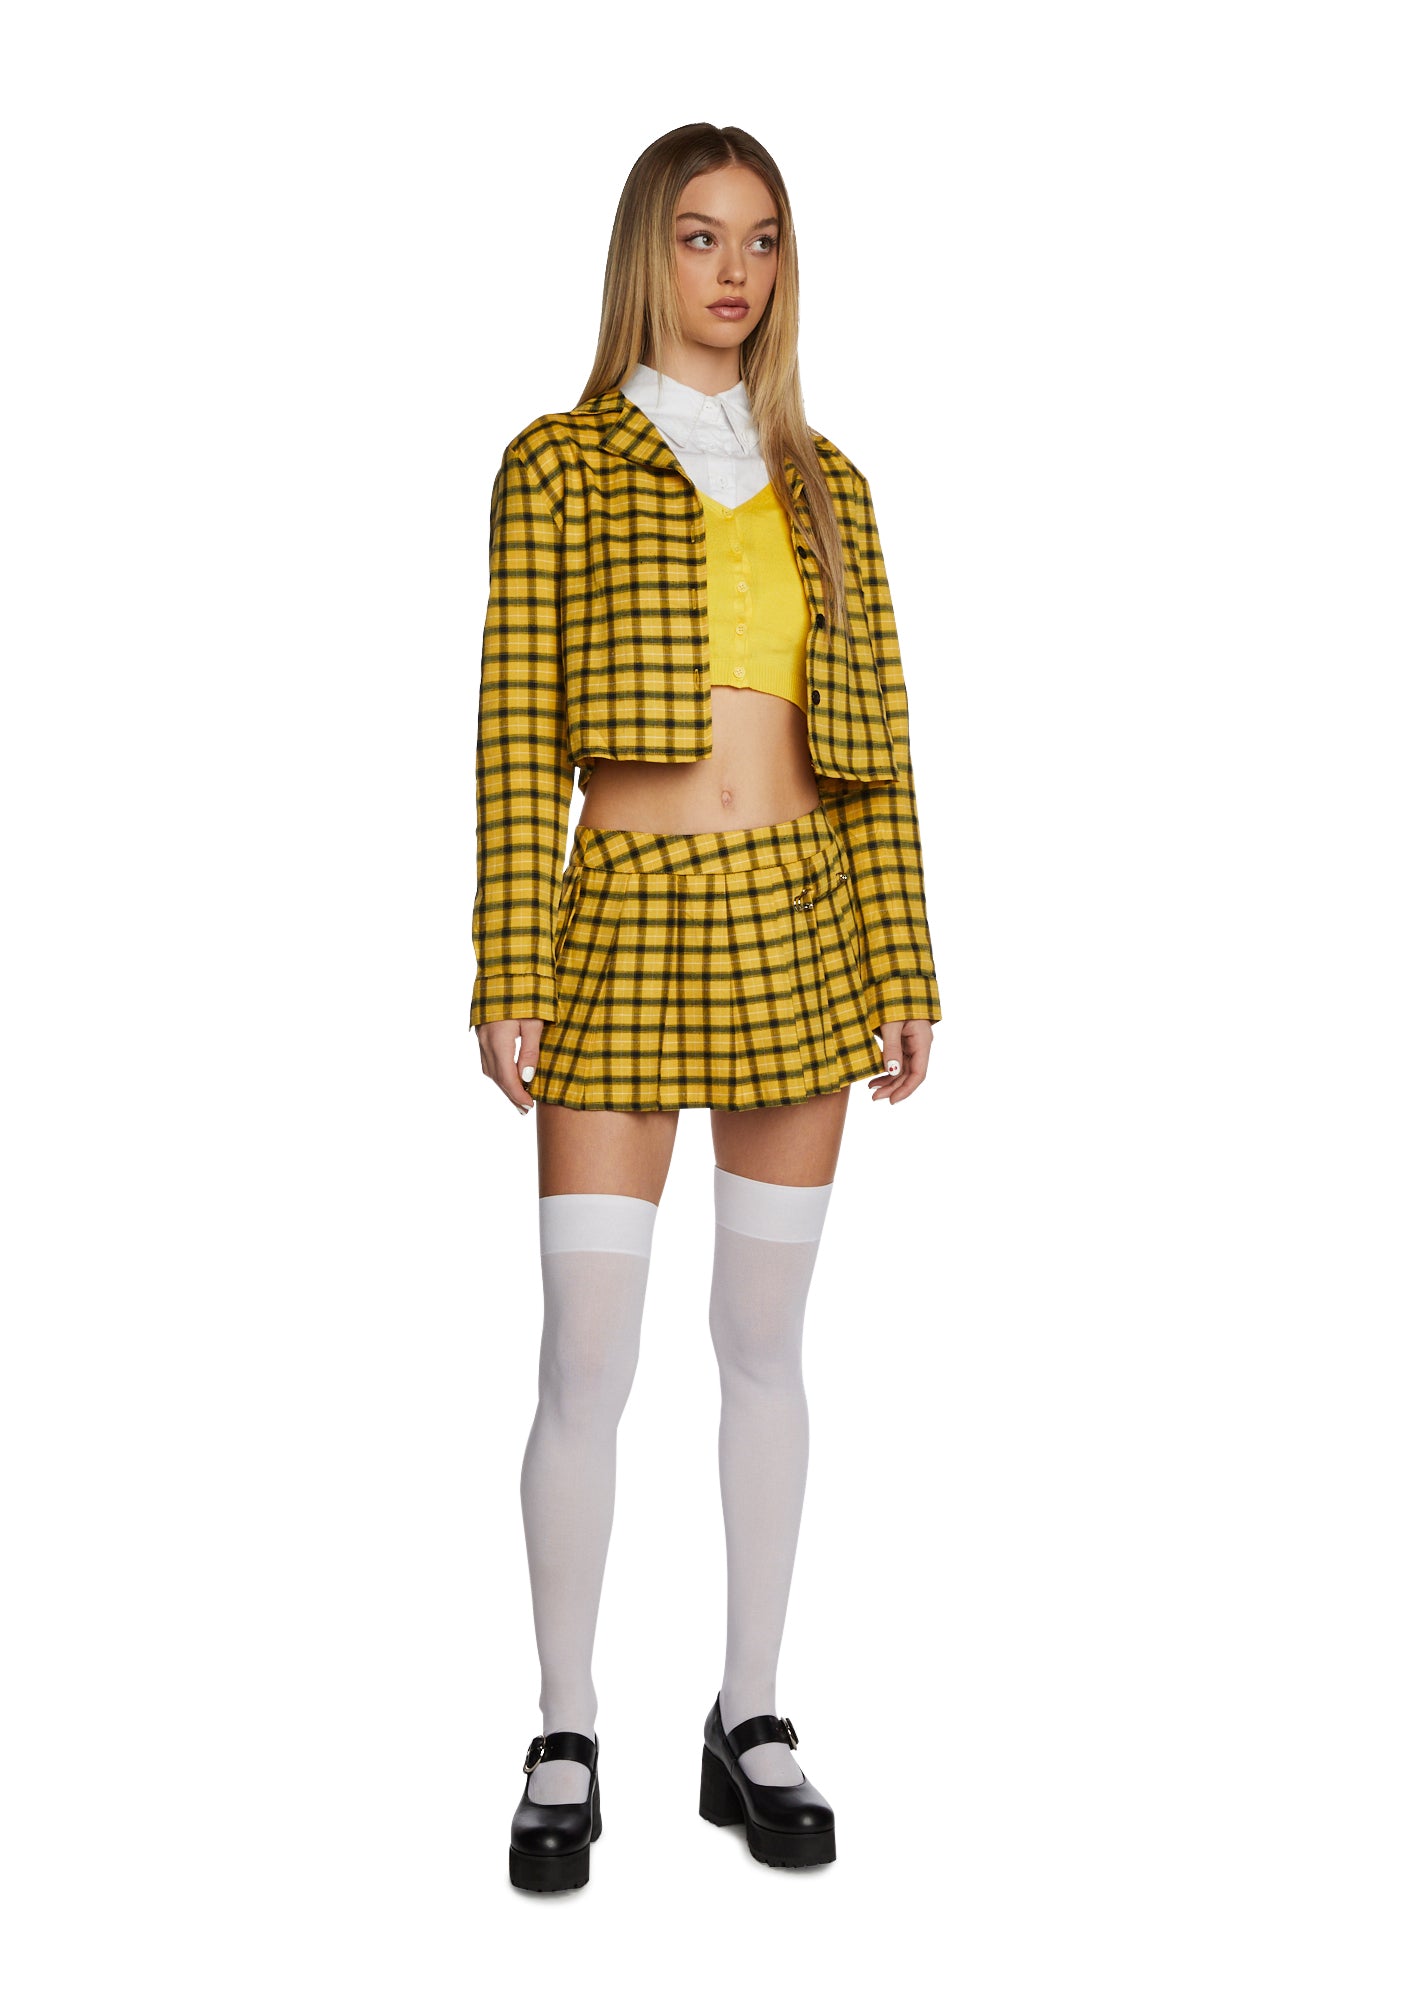 Cher Clueless Costume Outfit | Plaid Skirt Halloween Set - Yellow ...